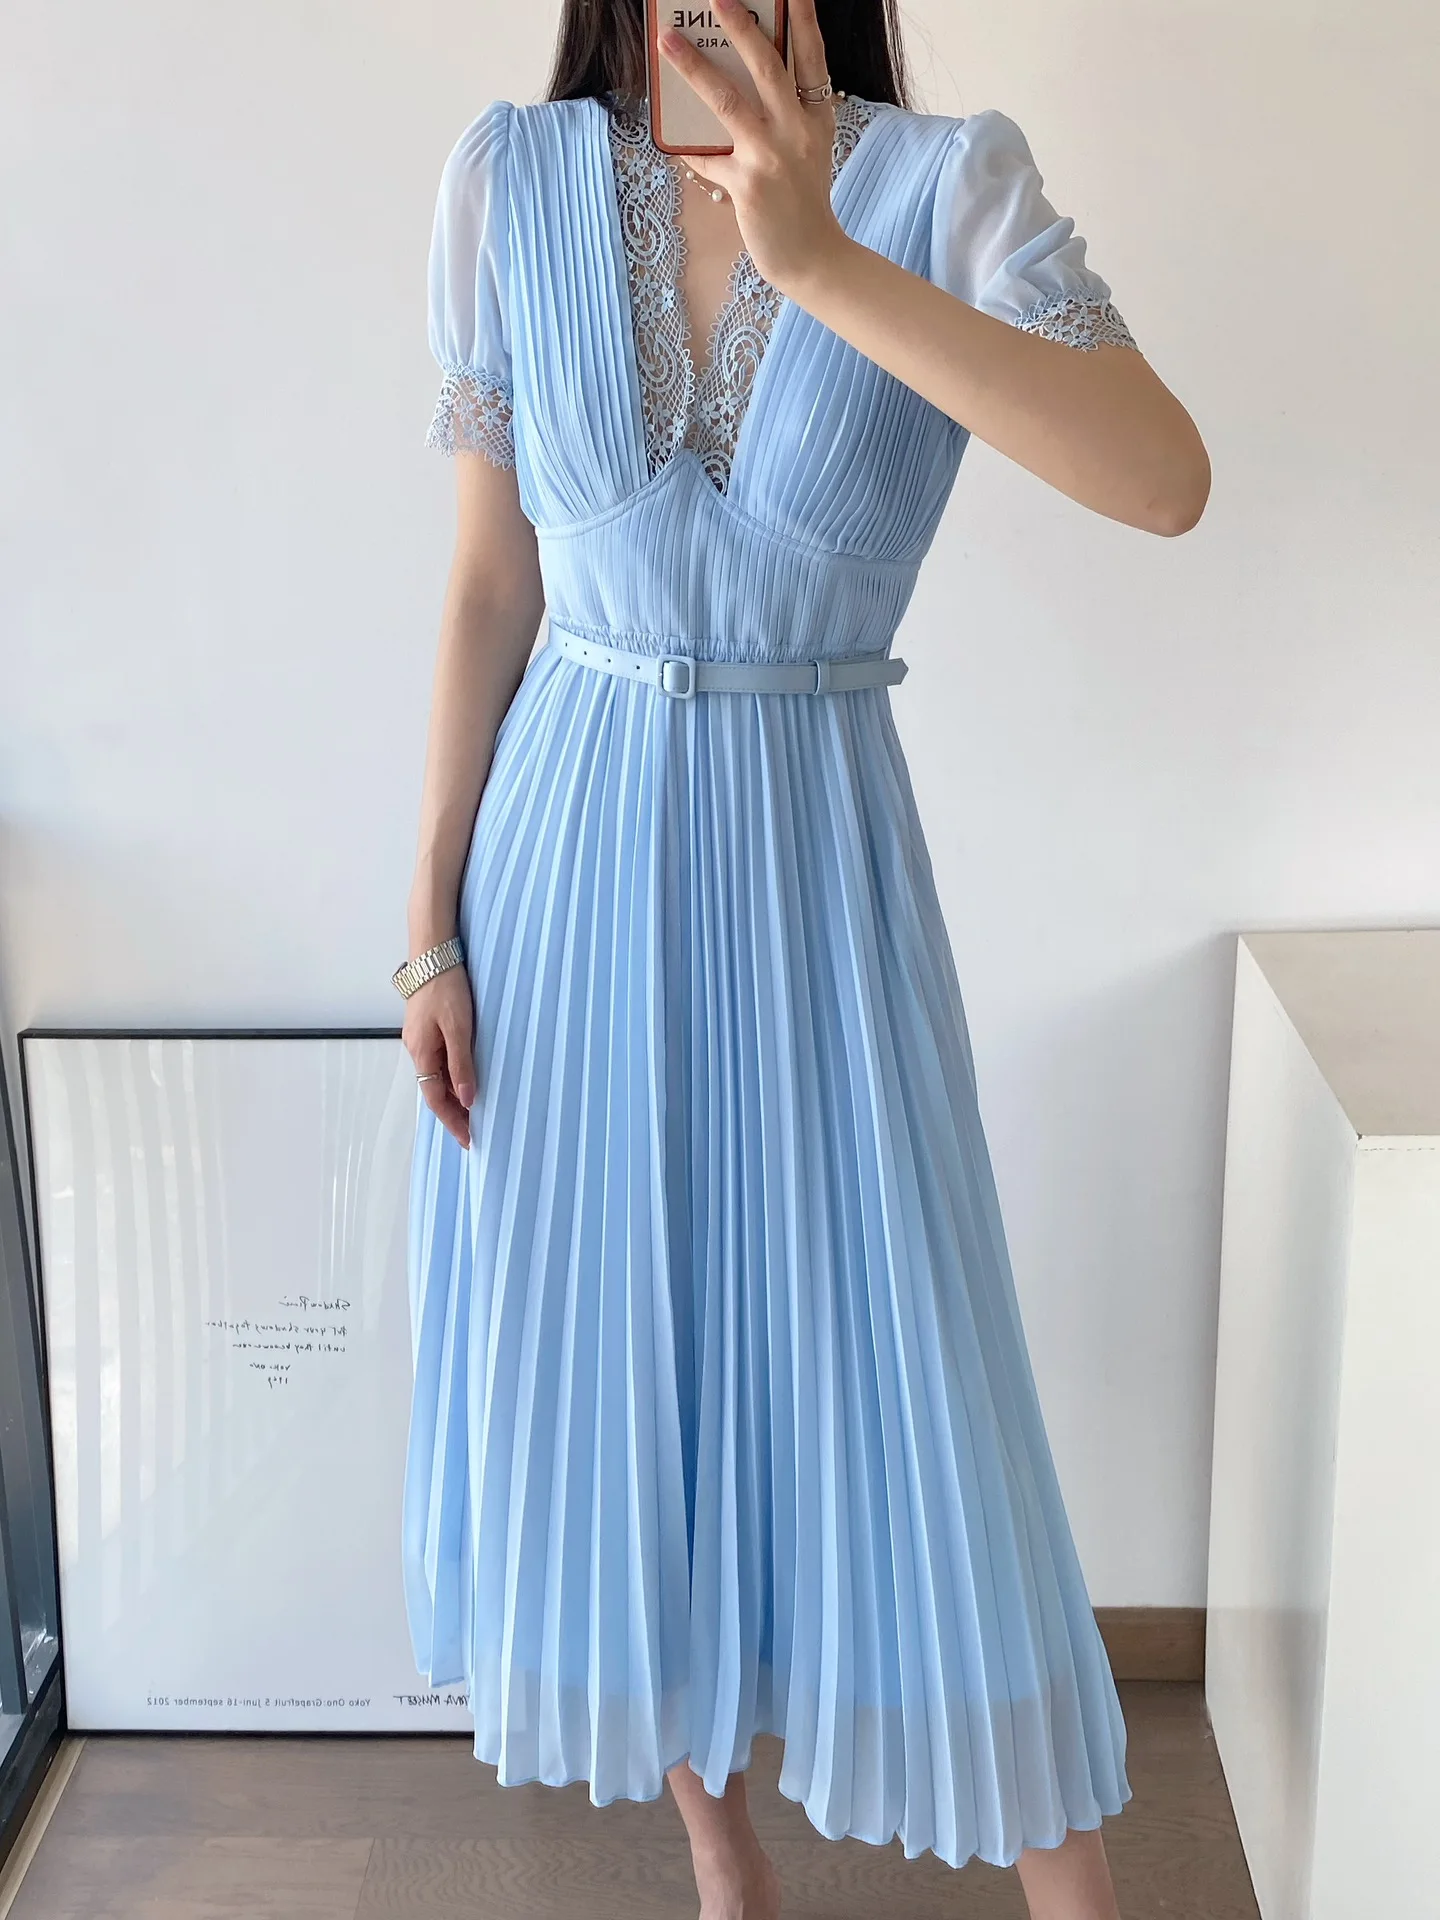 

2023 Autumn/Winter Fashion New Women's Clothing Embroidered Pleated Dress 0905